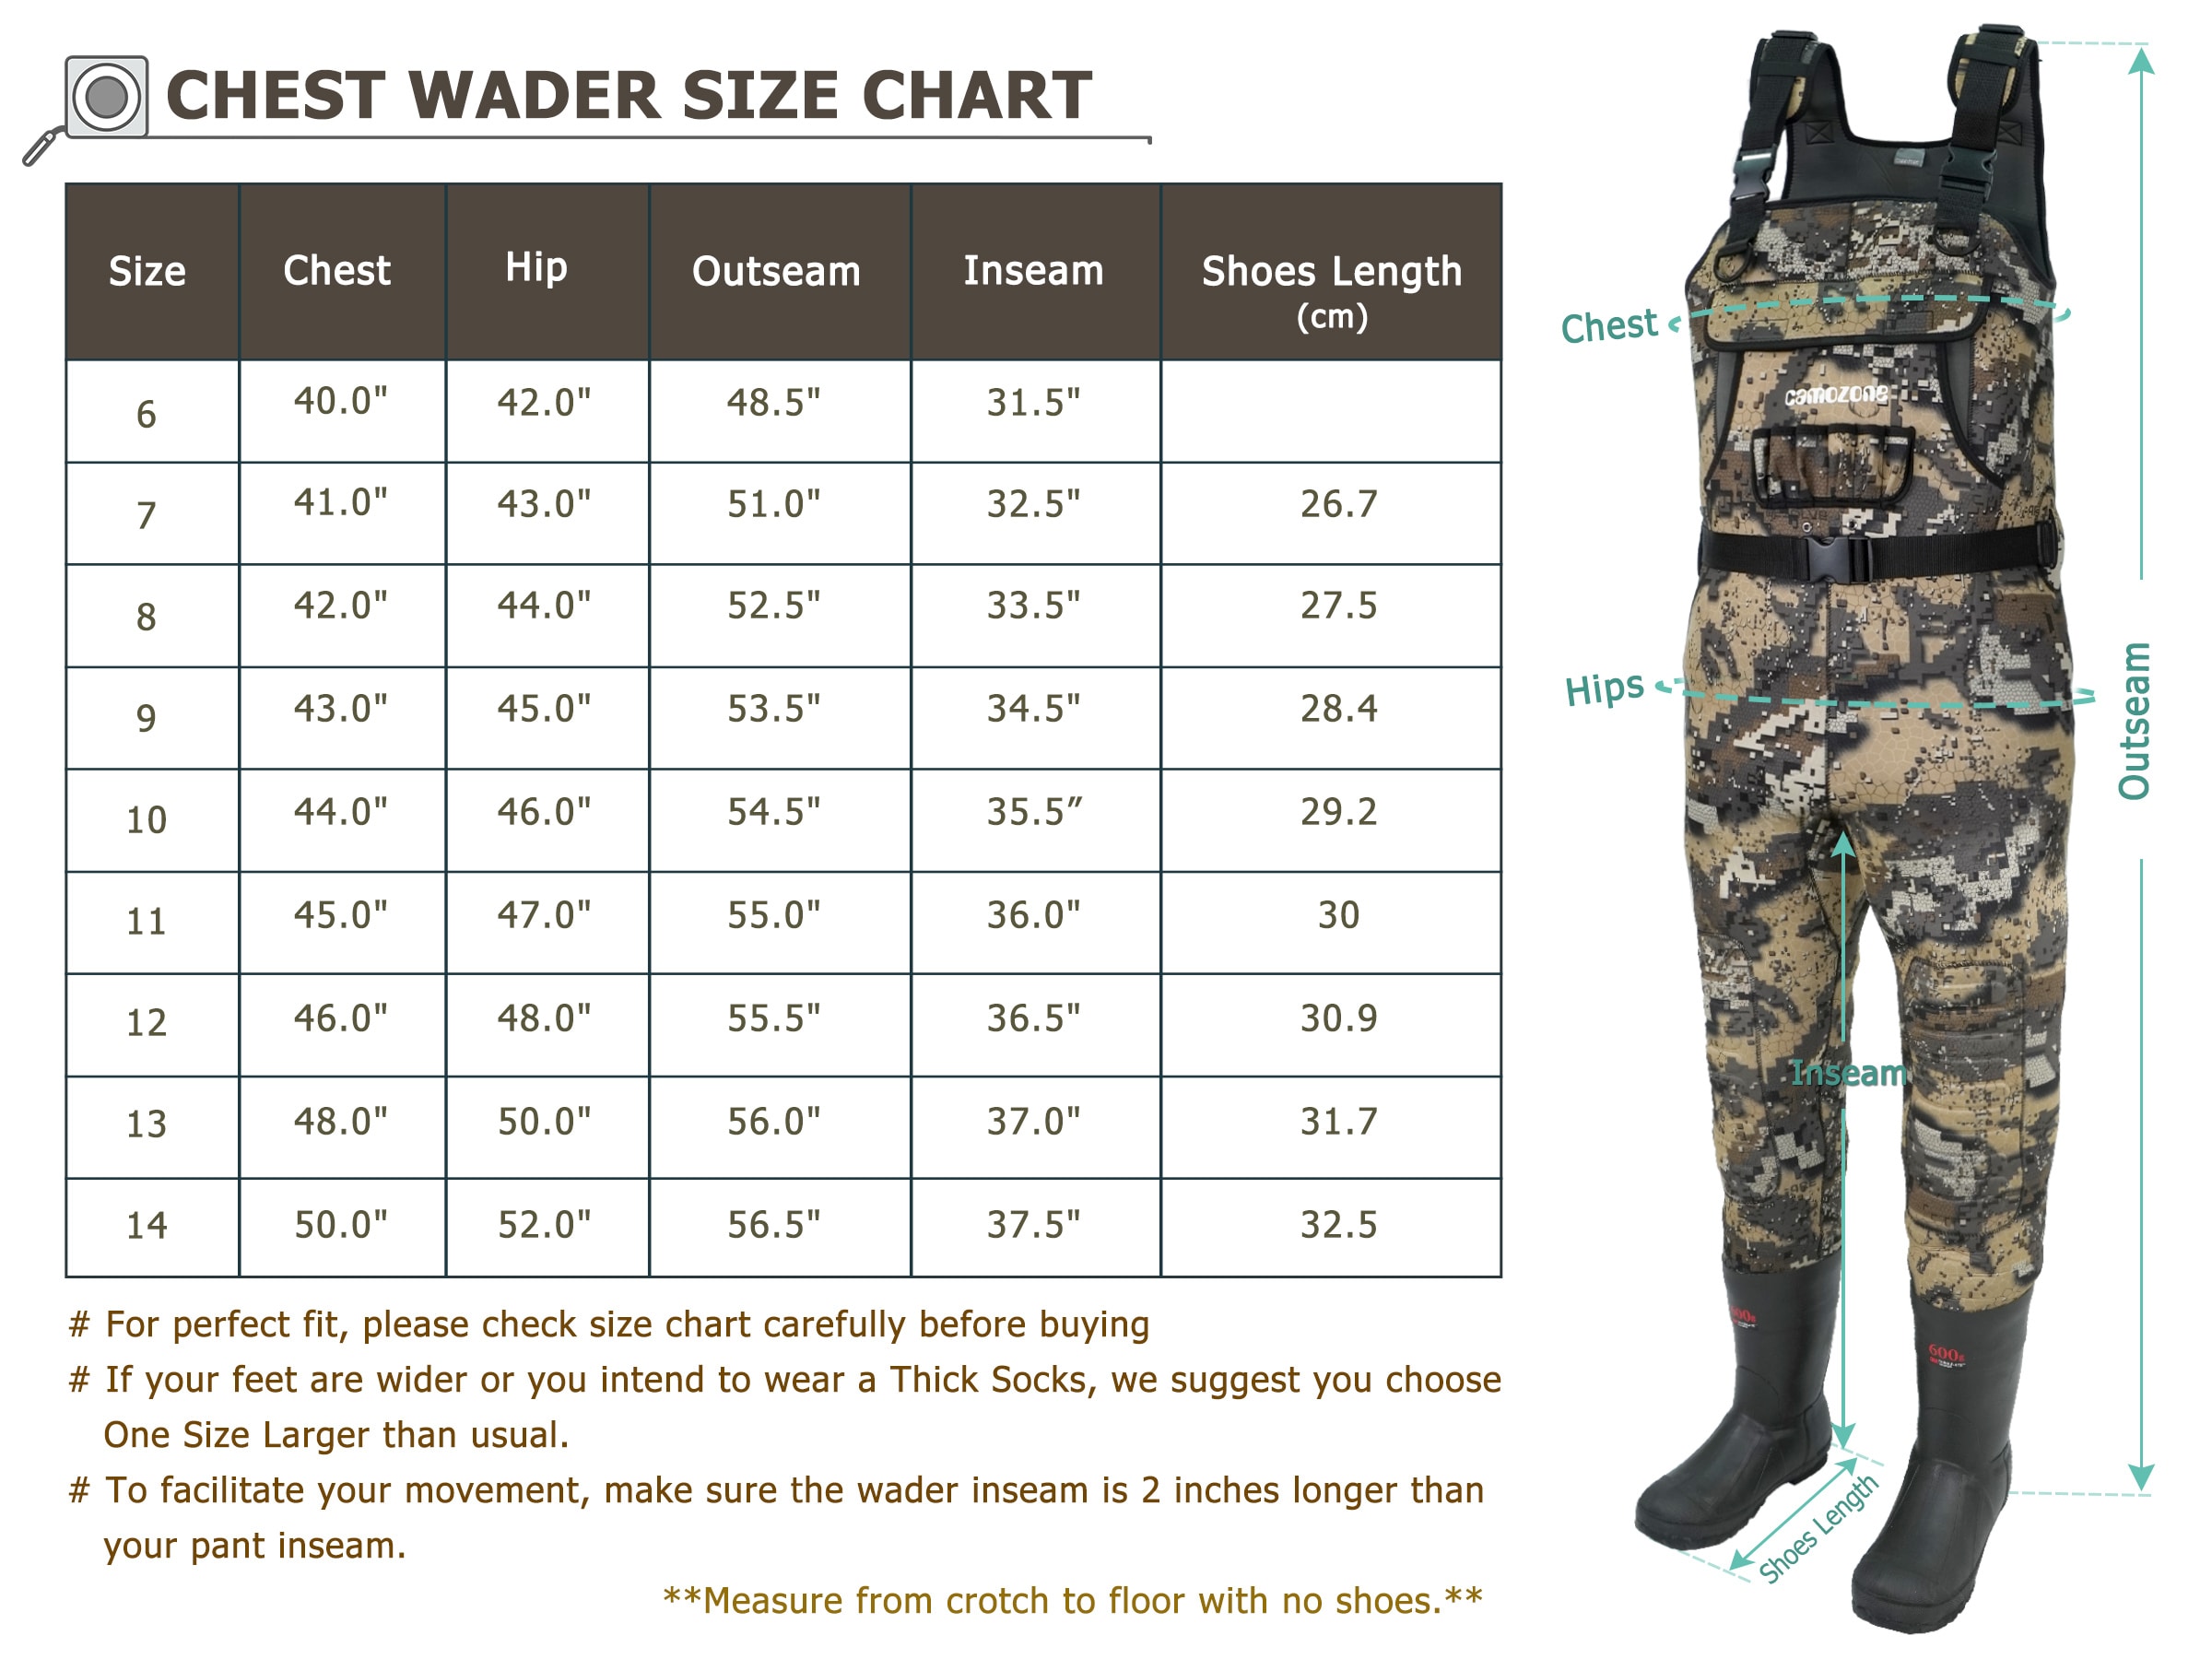 Durable and Lightweight Chest Waders for Men & Women | Waterproof Hunting,  Fishing, and Garden Work Waders with Boots